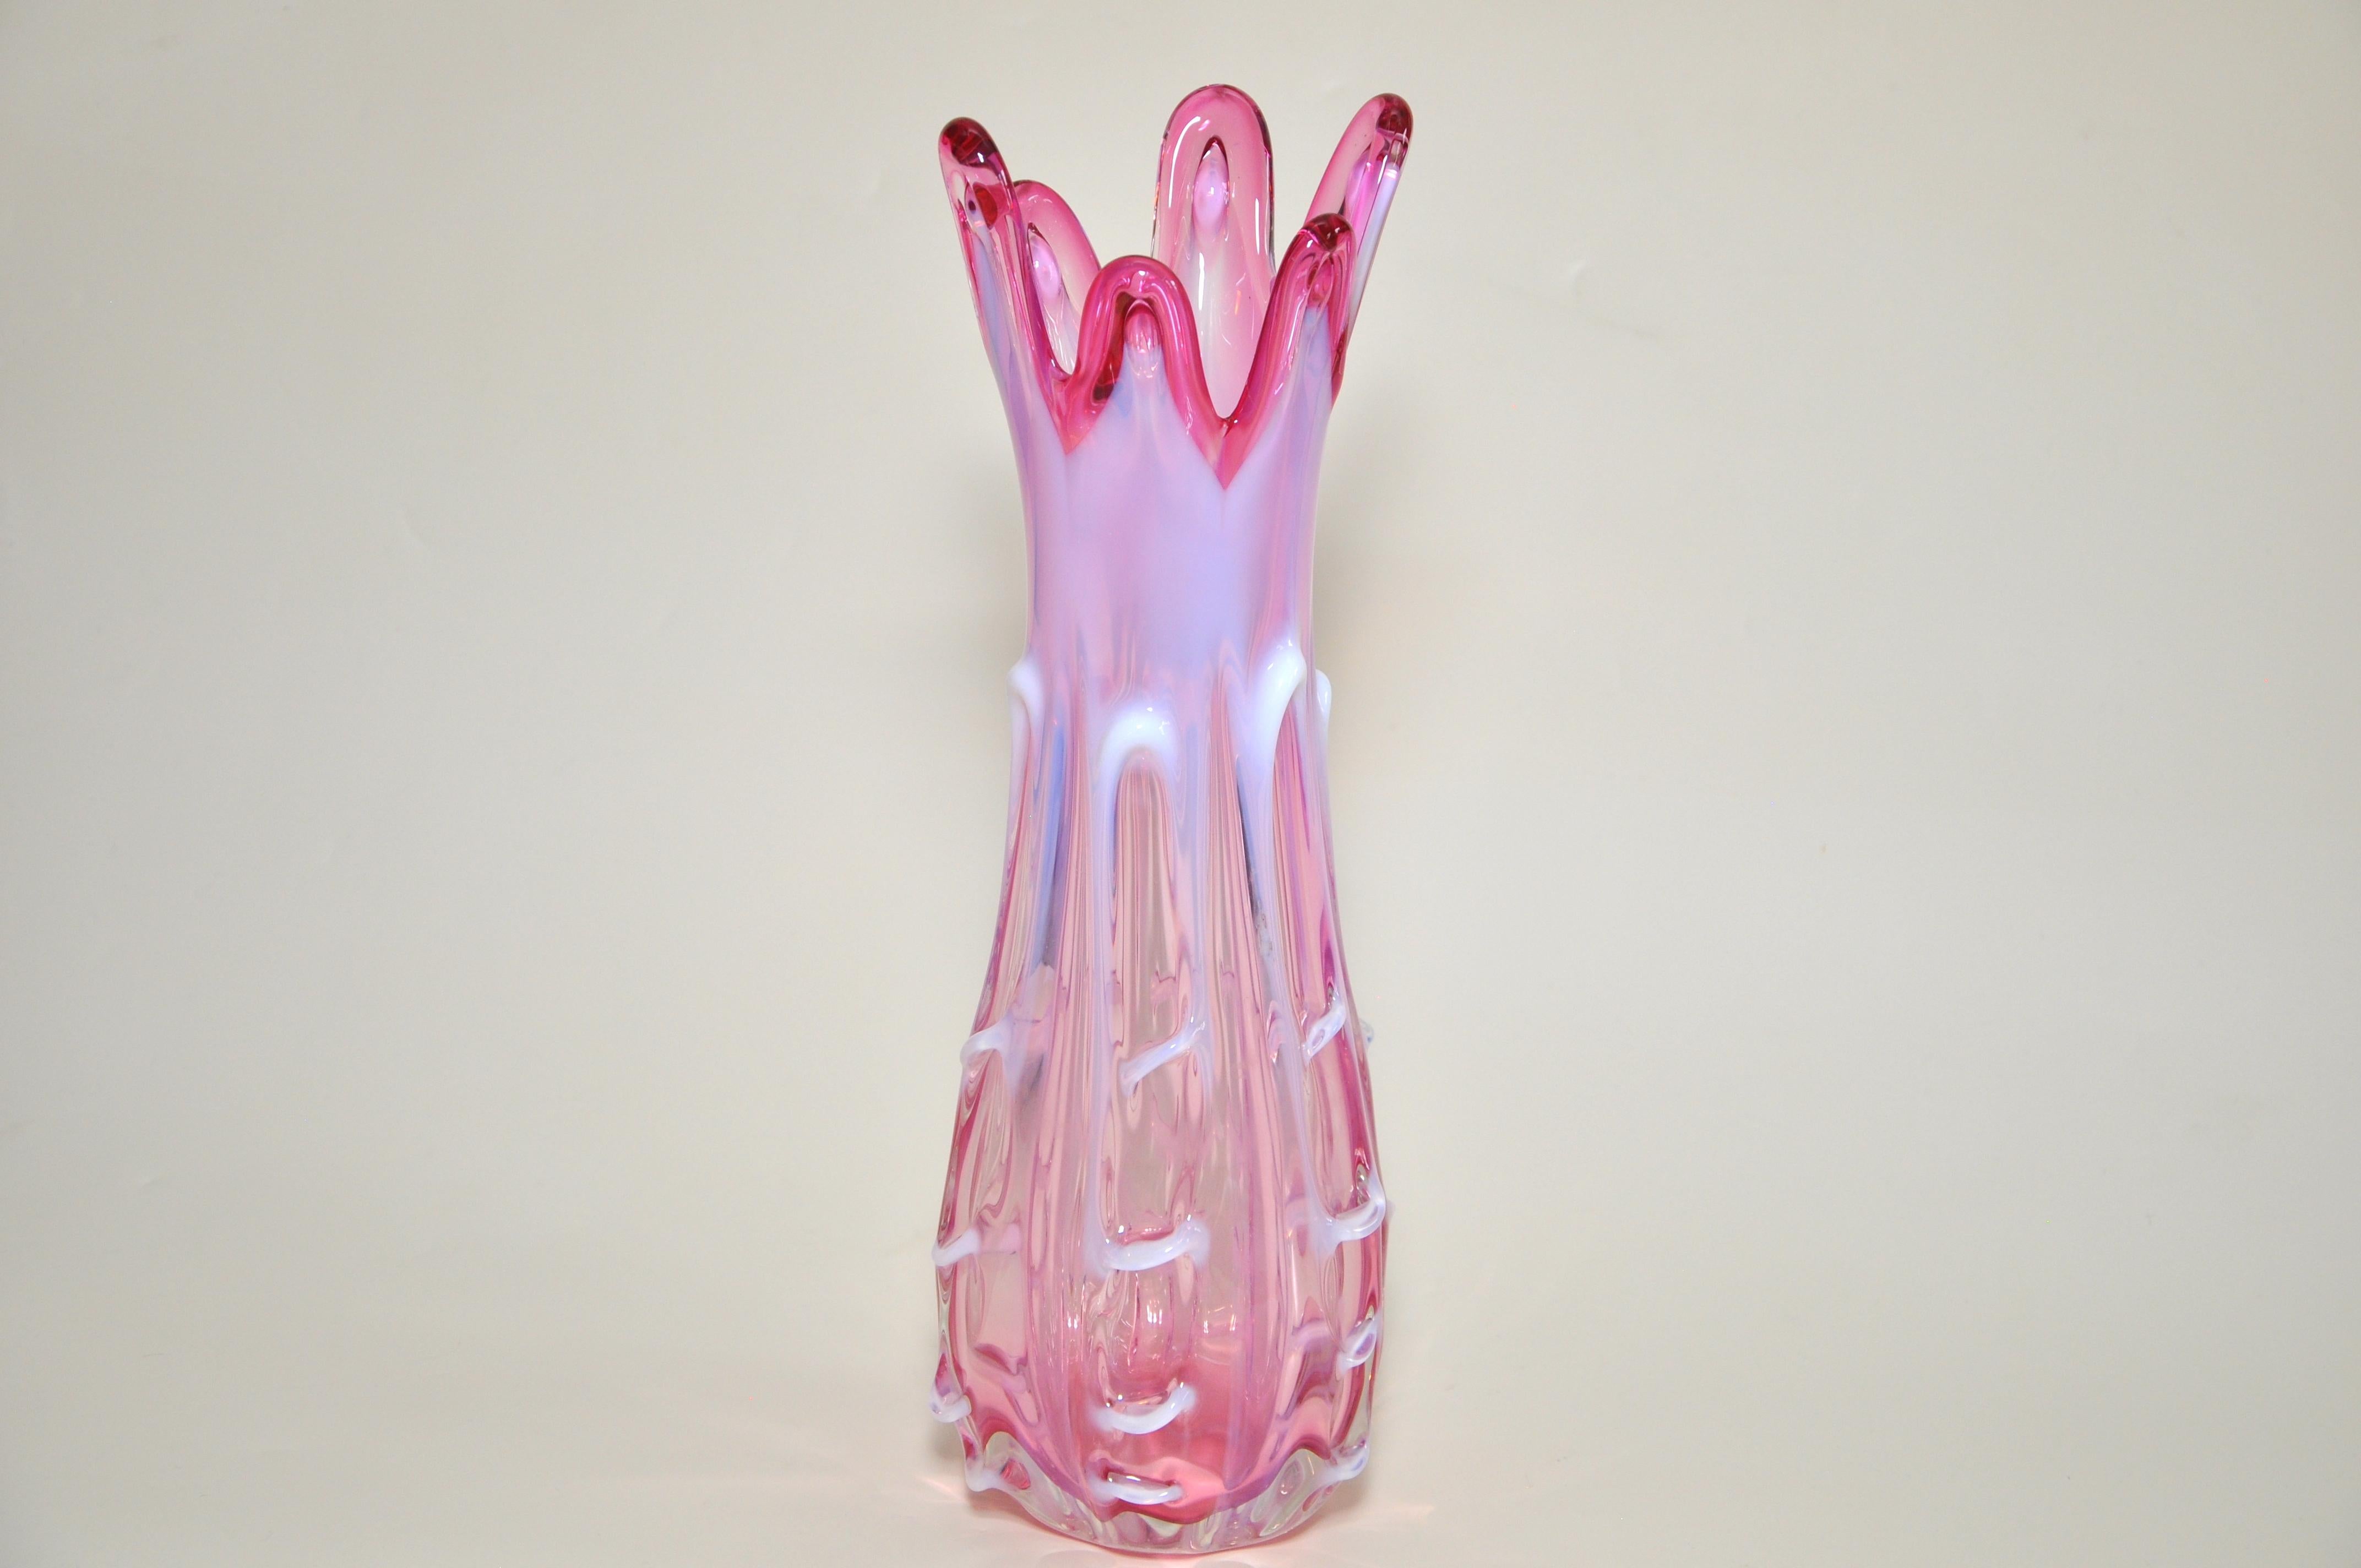 Title:
Large Stunning Vintage Pink White Art Glass Bowl Italian 

Description:
A fabulous, large vintage piece of art glass in a flamboyant, quirky shape that looks like it could have been made today. This piece is wonderful as it would look